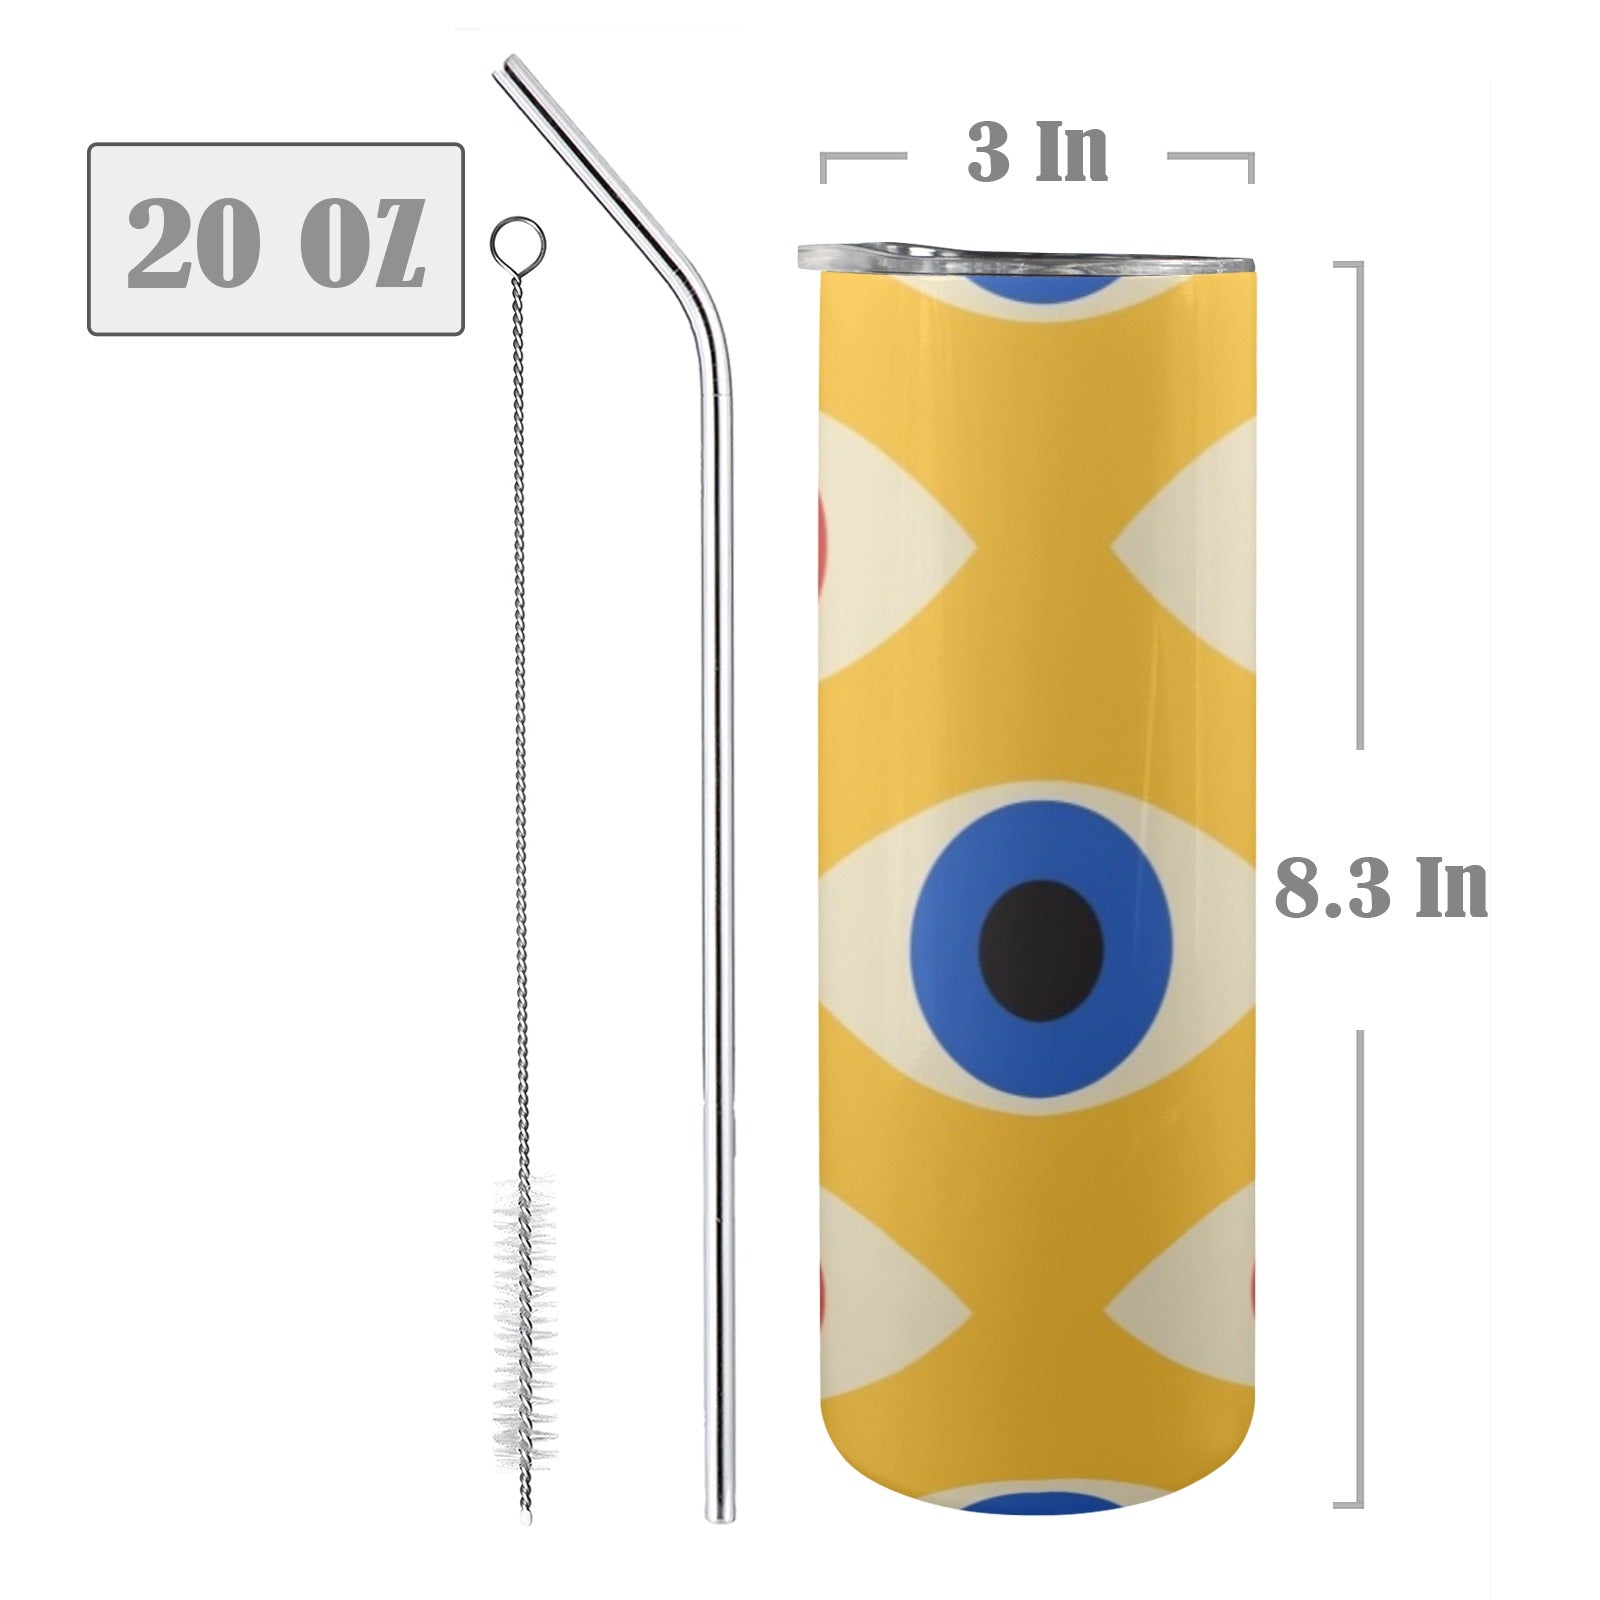 Eyes on Yellow - 20oz Tall Skinny Tumbler with Lid and Straw 20oz Tall Skinny Tumbler with Lid and Straw